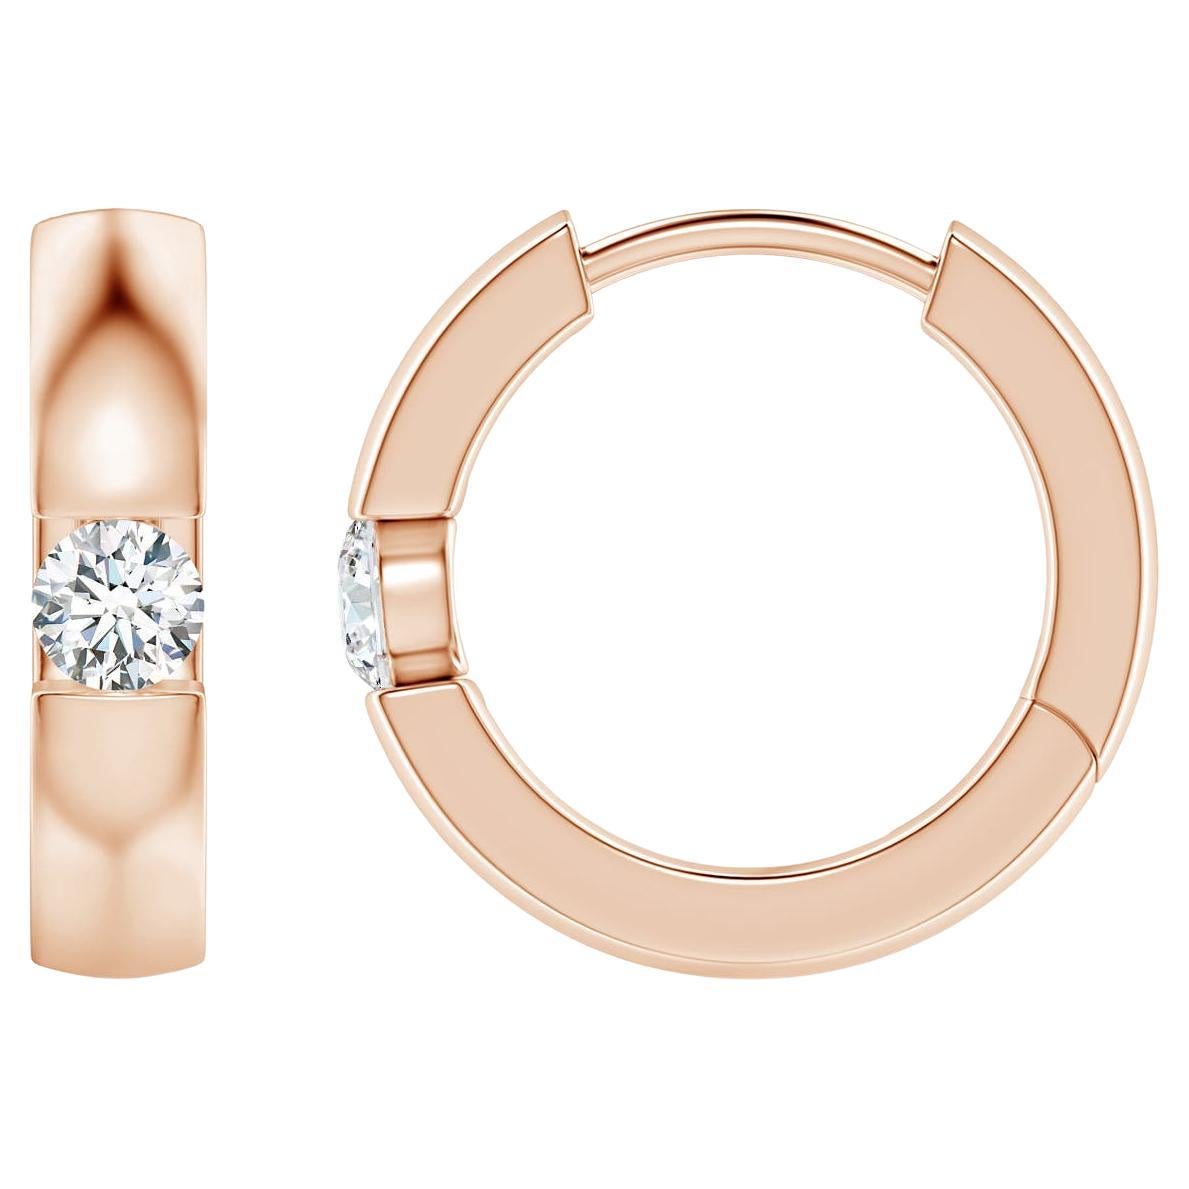 Natural Round Diamond Hoop Earrings in 14K Rose Gold (Size-2.5mm, Color-G)